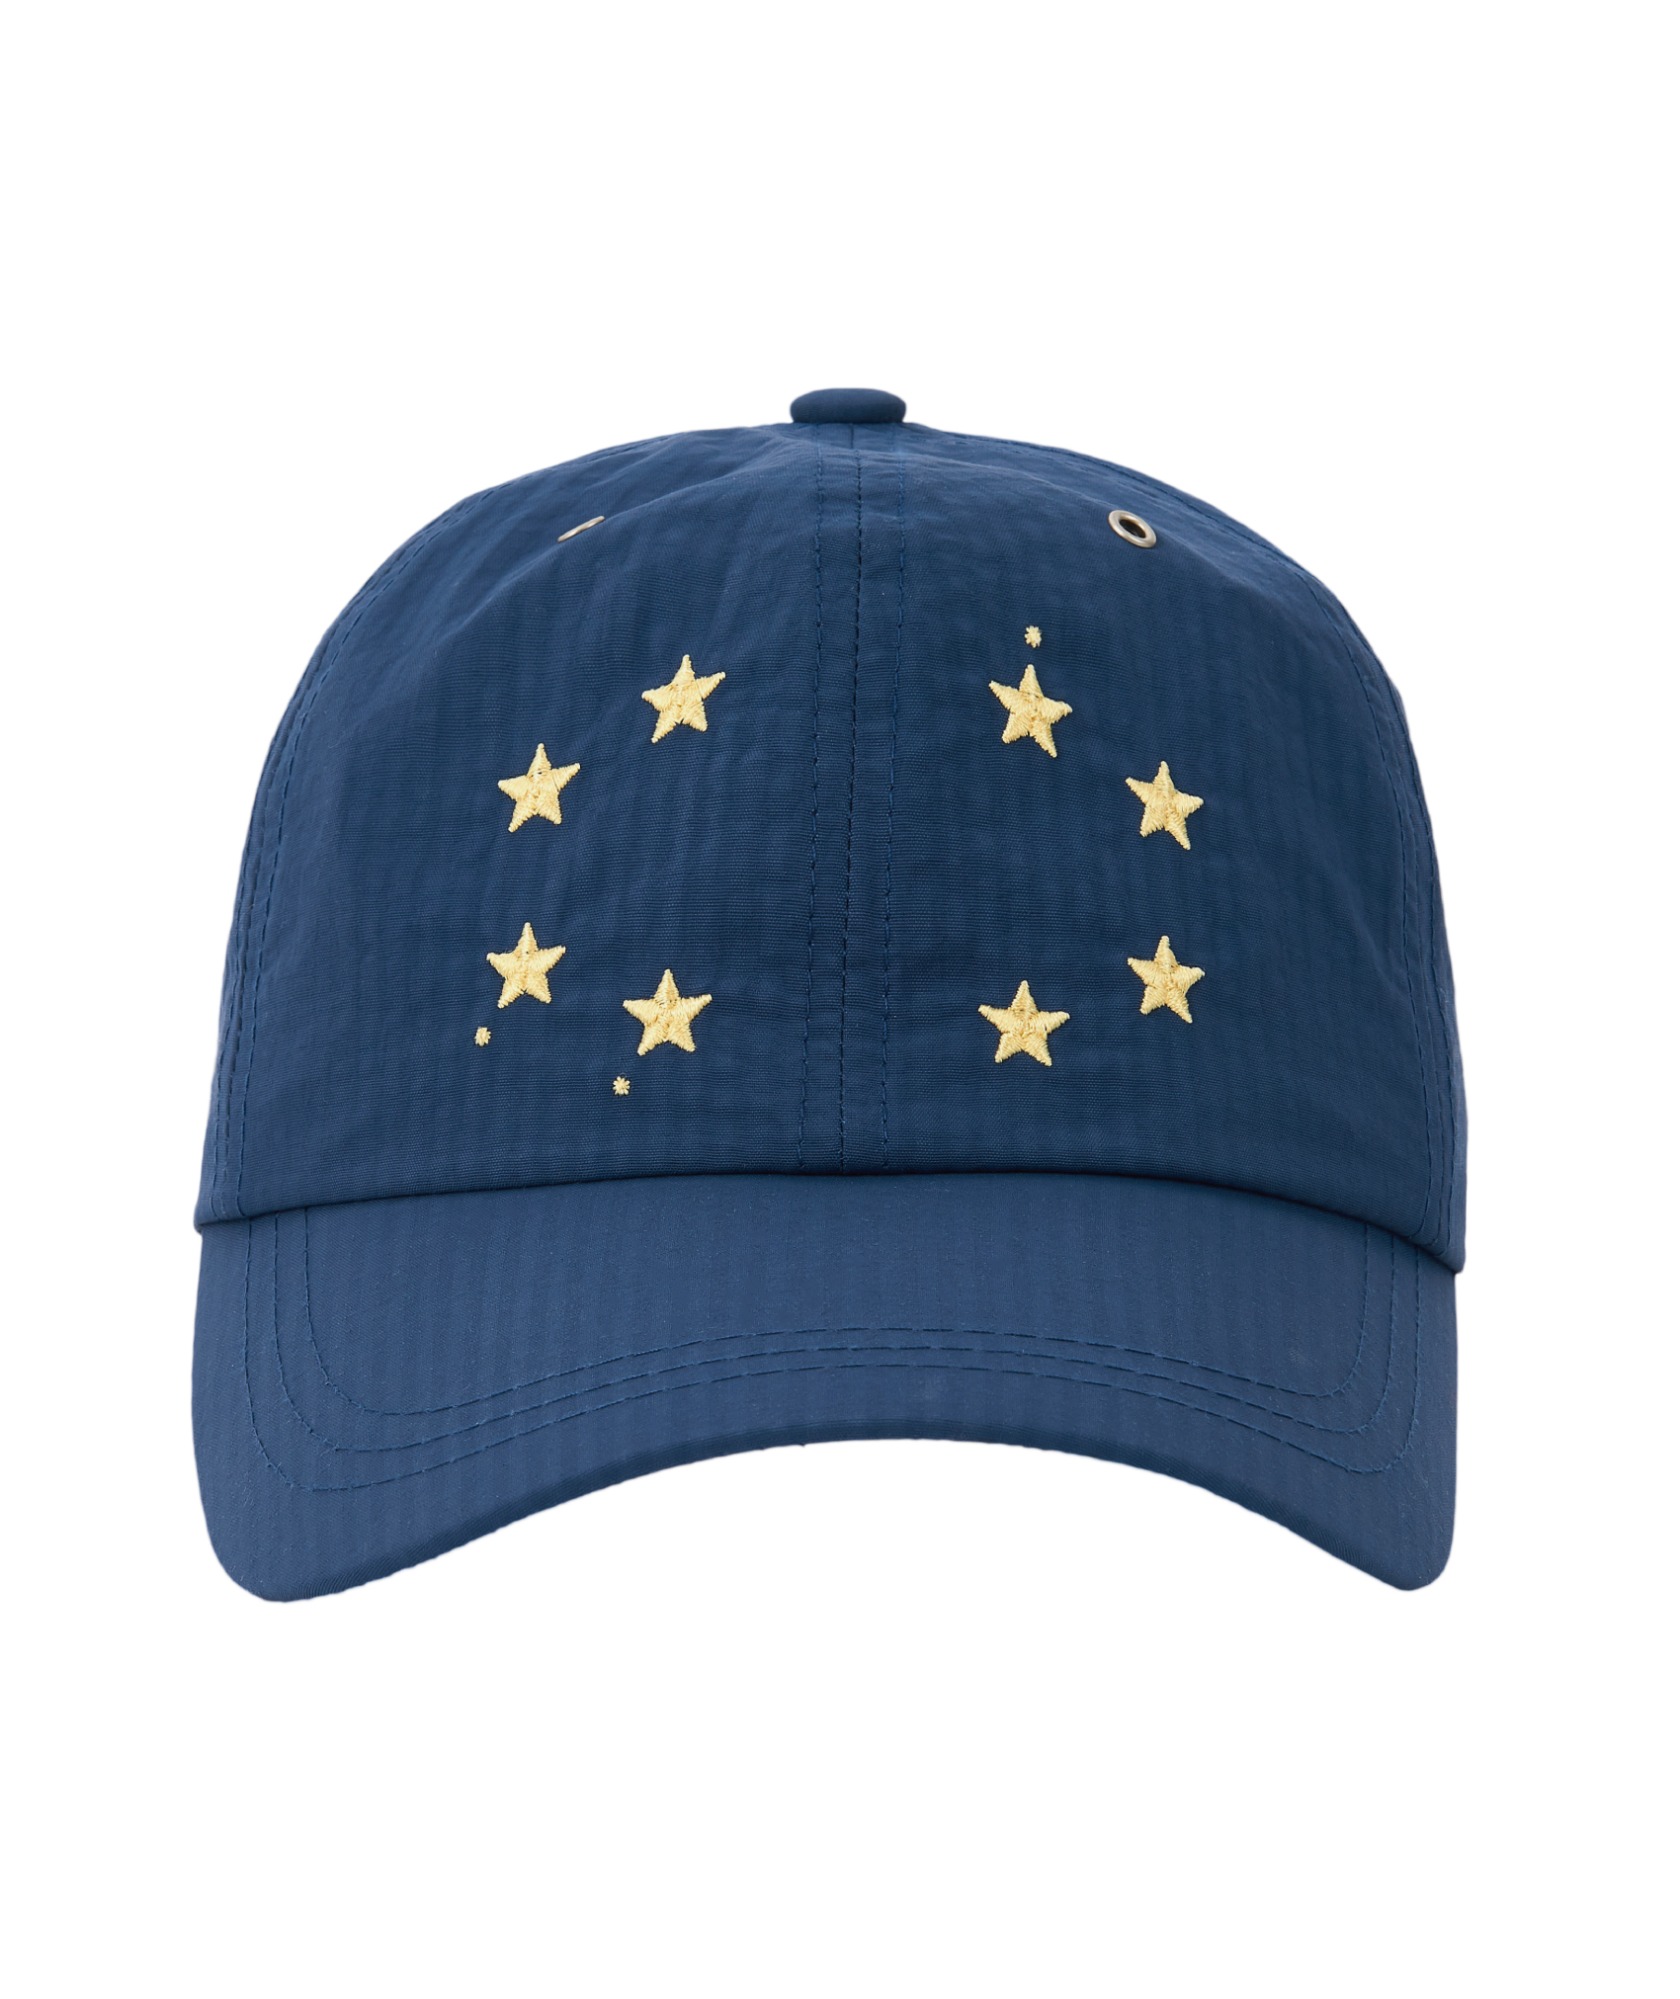 STAR EMBROIDERED BALL CAP (BLUE)